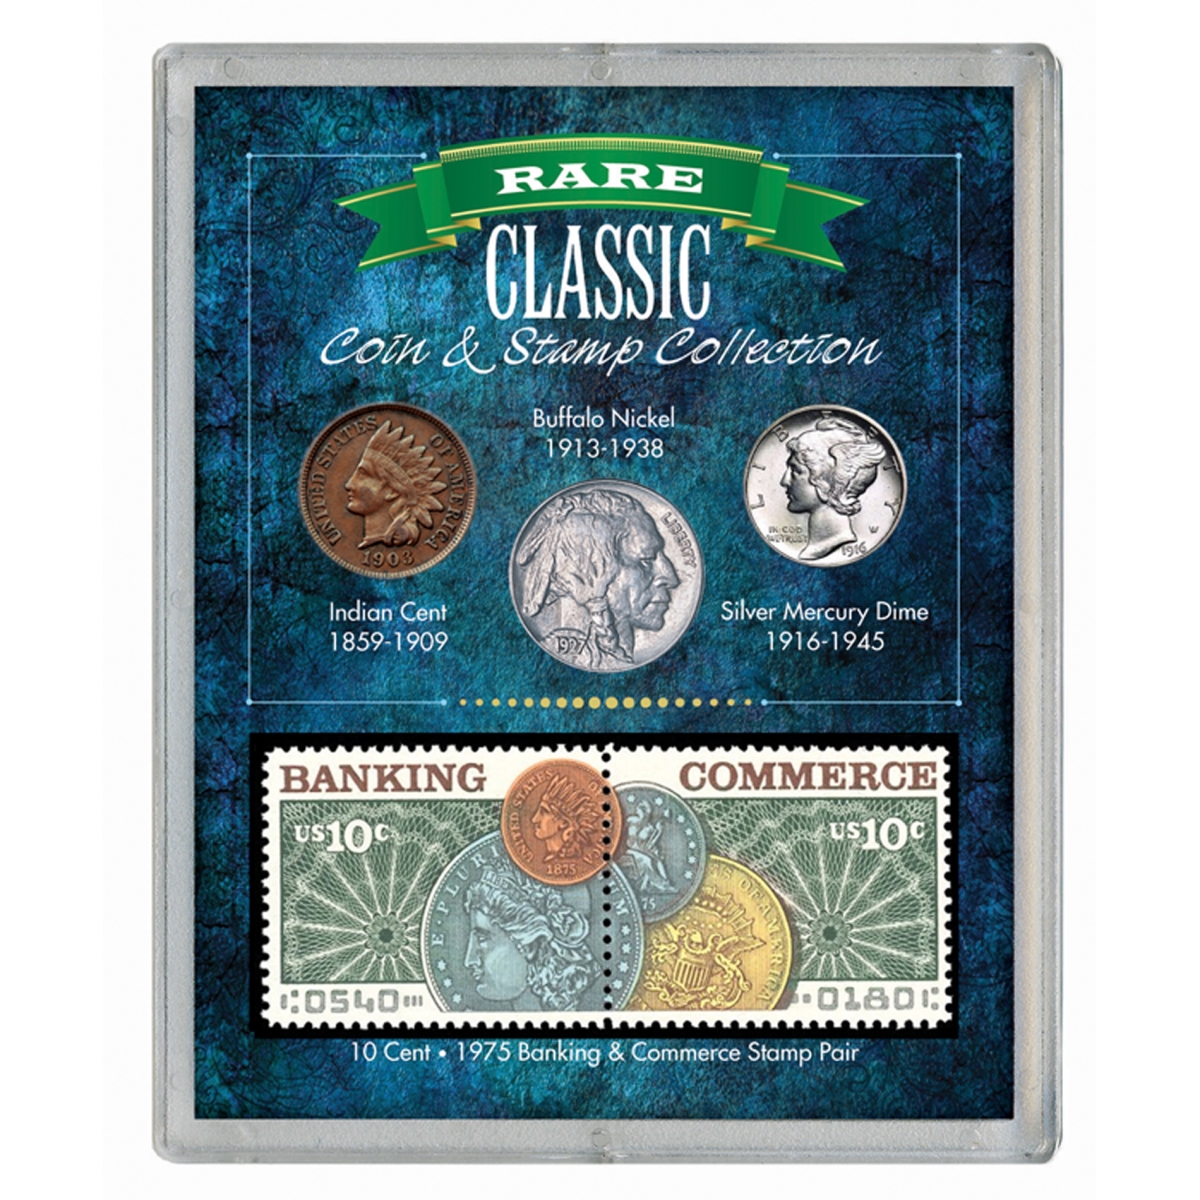 Picture of American Coin Treasures 12475 Rare Classic Coin & Stamp Collection